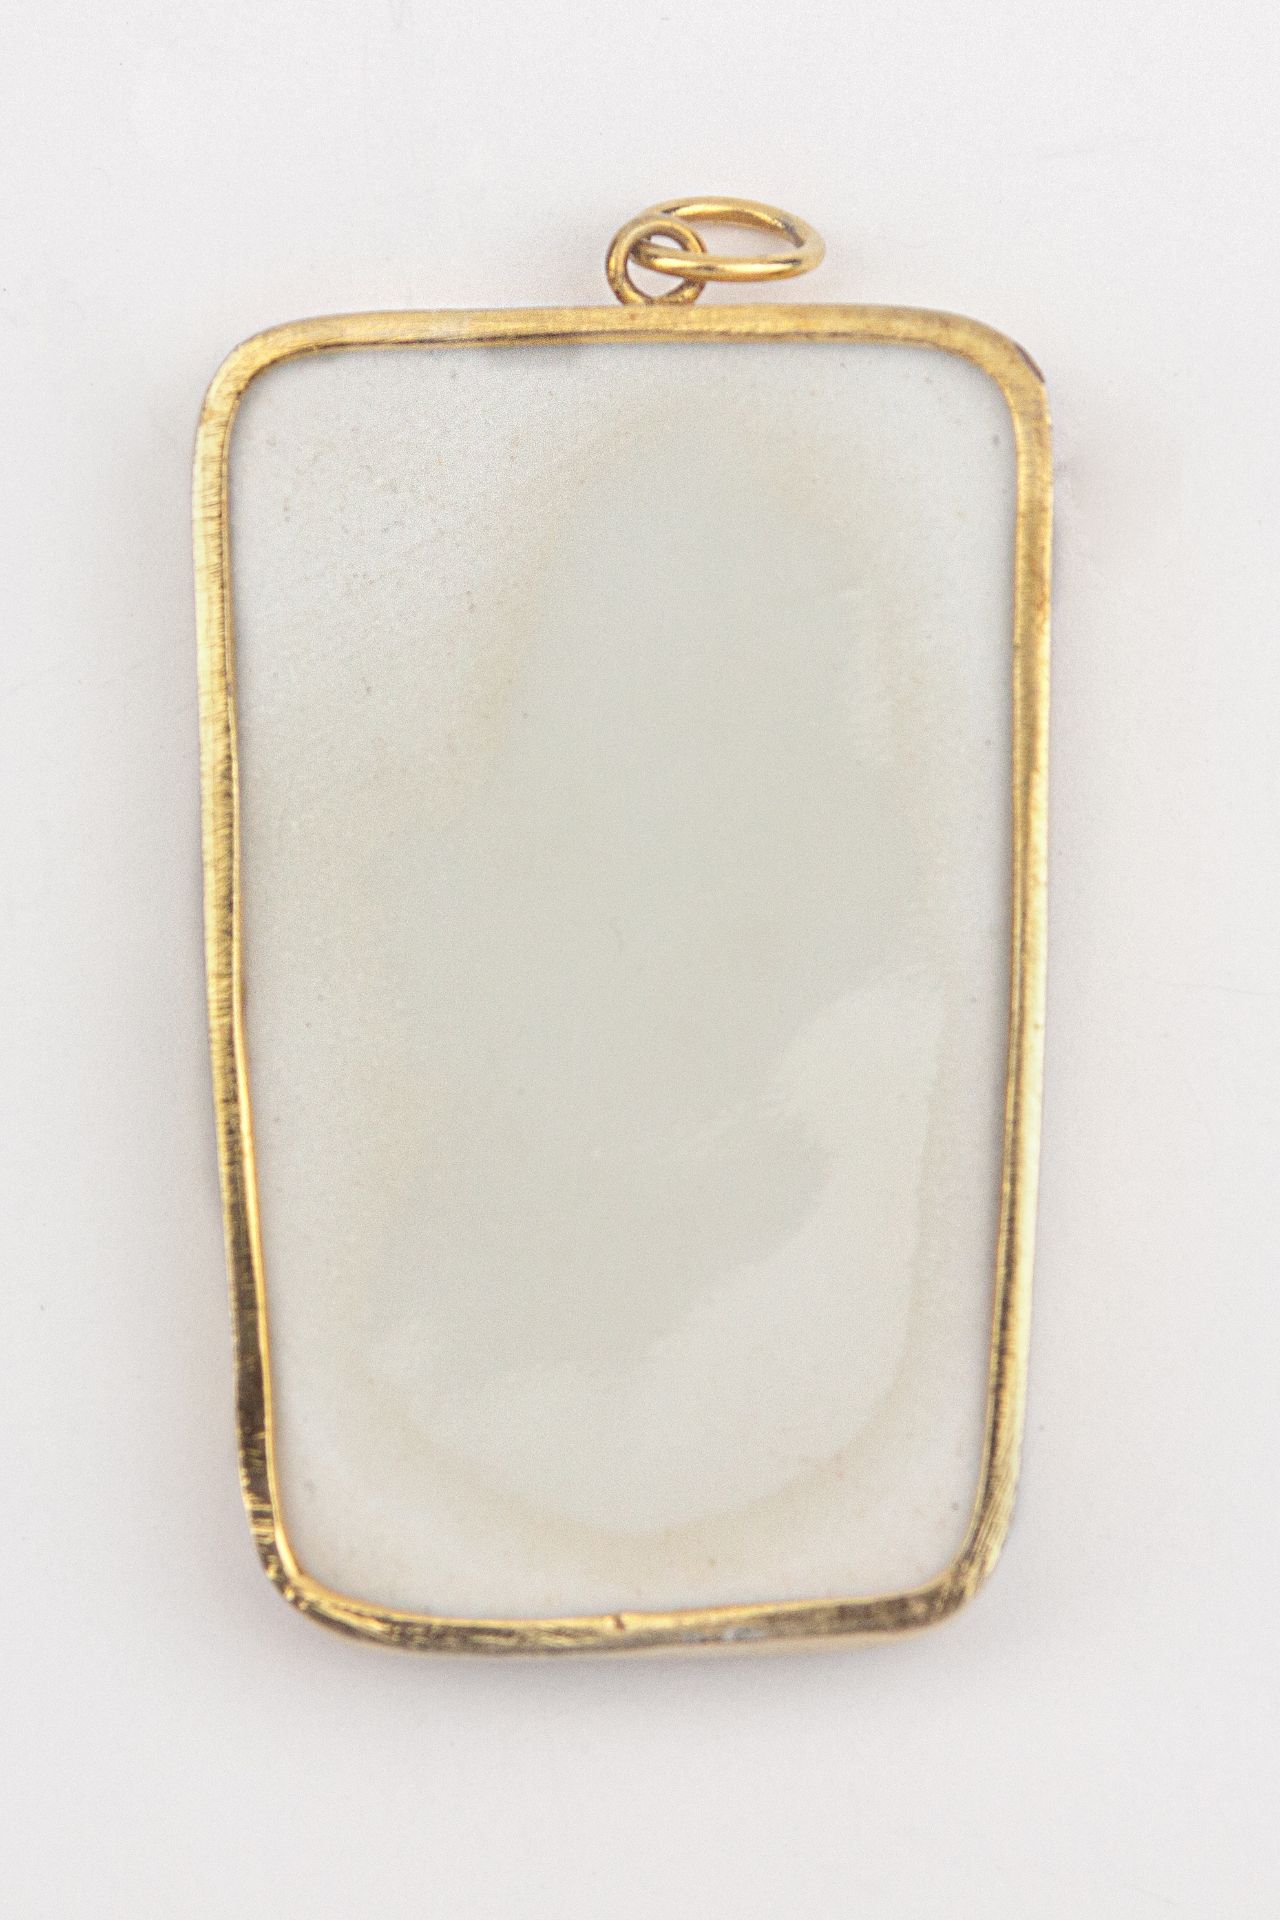 A Chinese gold pendant with a Kangxi porcelain plaque - Image 2 of 2